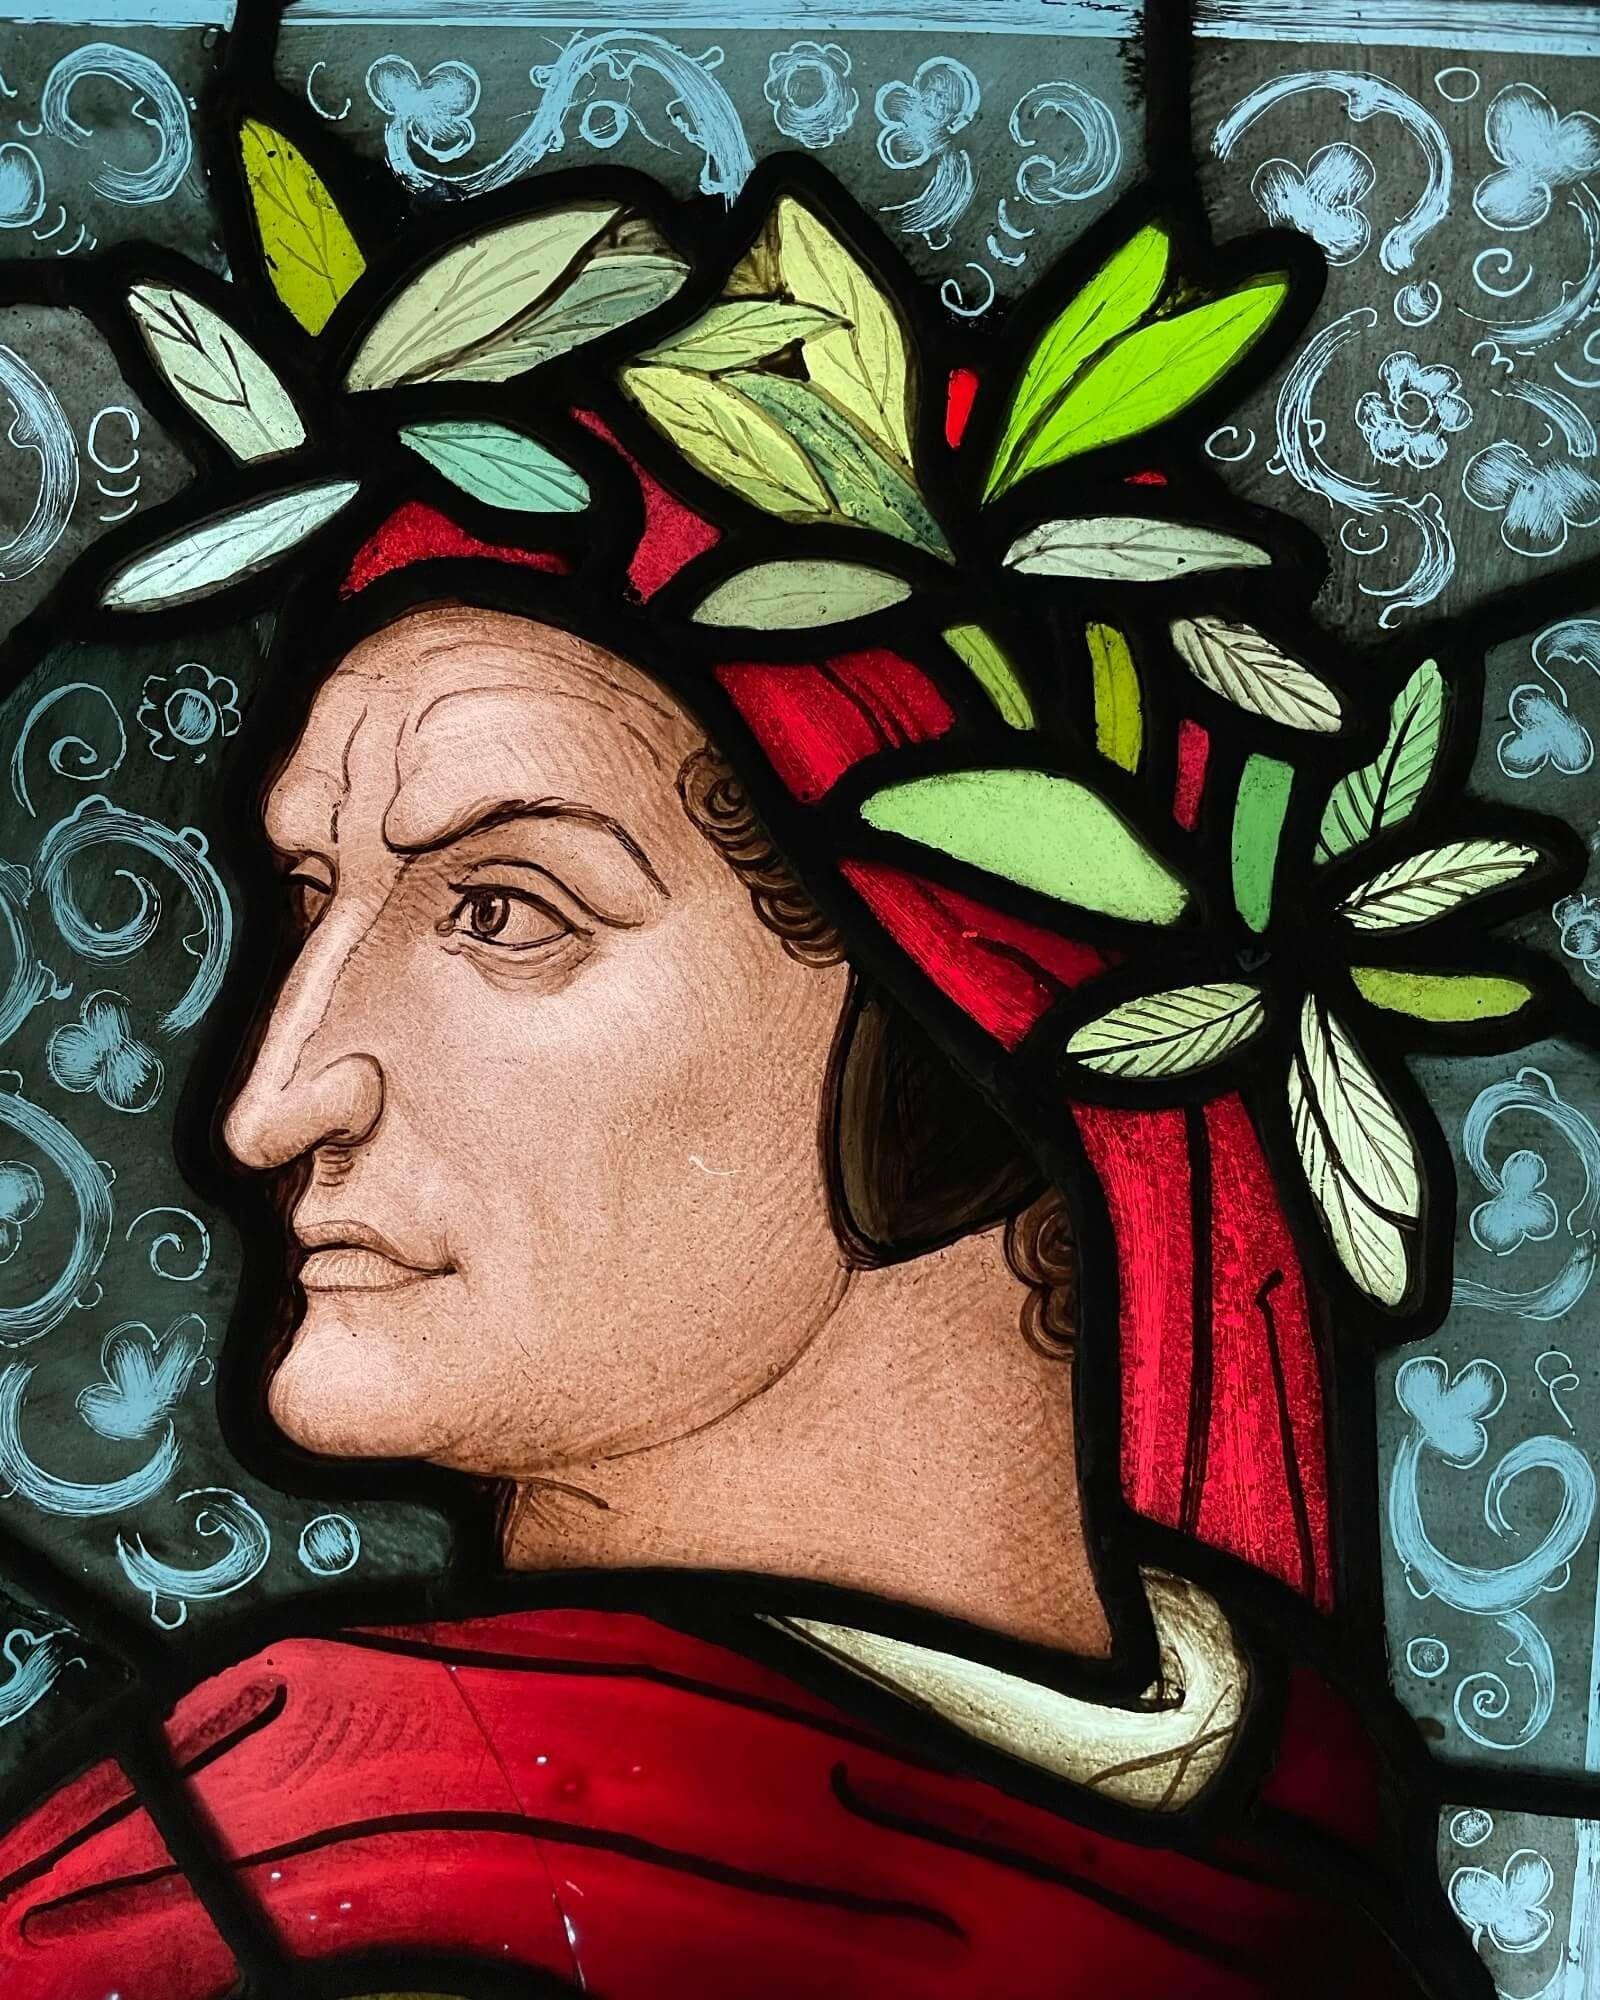 A vibrant and brilliantly detailed mid 19th century antique stained glass window depicting Dante Alighieri, famed late 13th to early 14th century Italian philosopher, writer and poet.

He is captured here in stained glass as he is often portrayed in